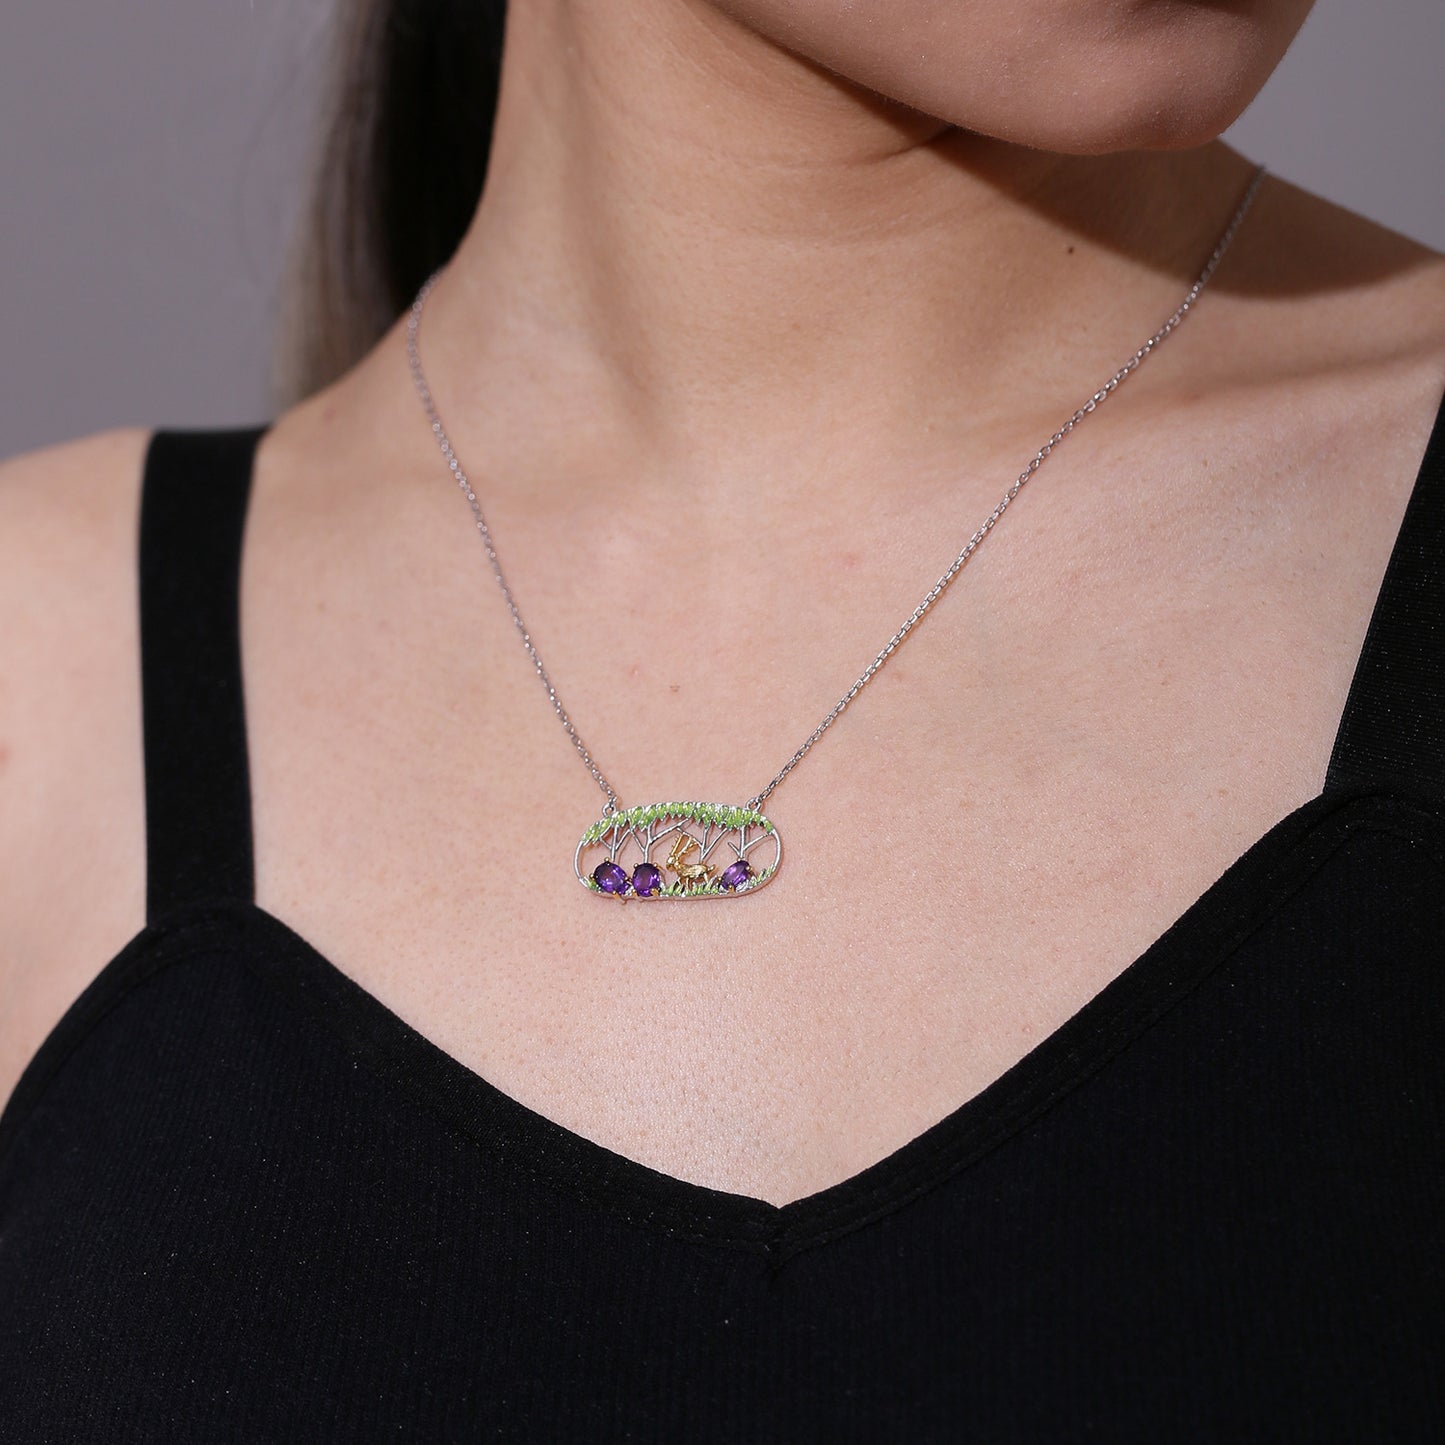 Natural Style Inlaid with Colourful Gemstone Little Deer Pendant Sterling Silver Necklace for Women